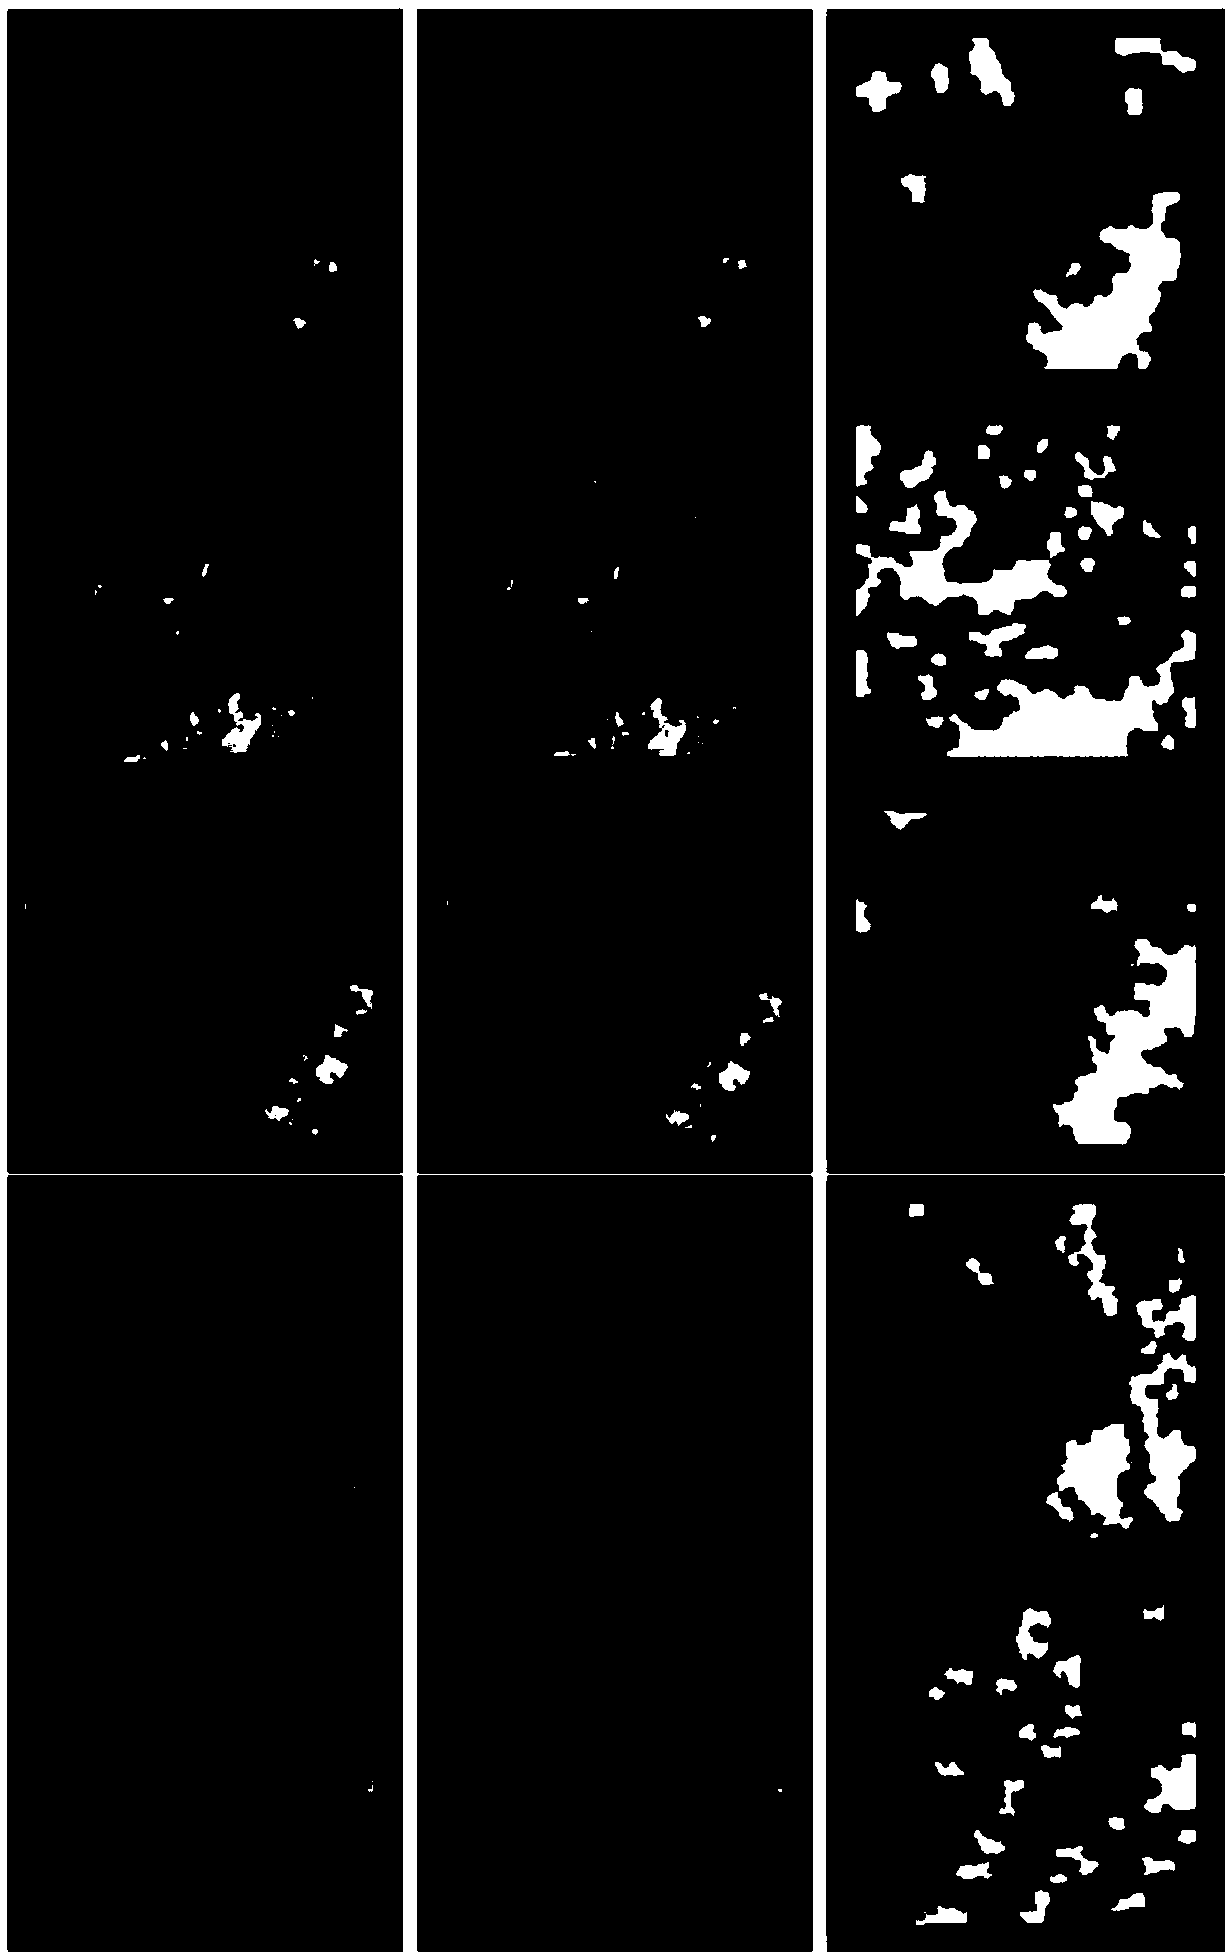 A method for detecting and removing thick clouds from coarse-to-fine time-series remote sensing images